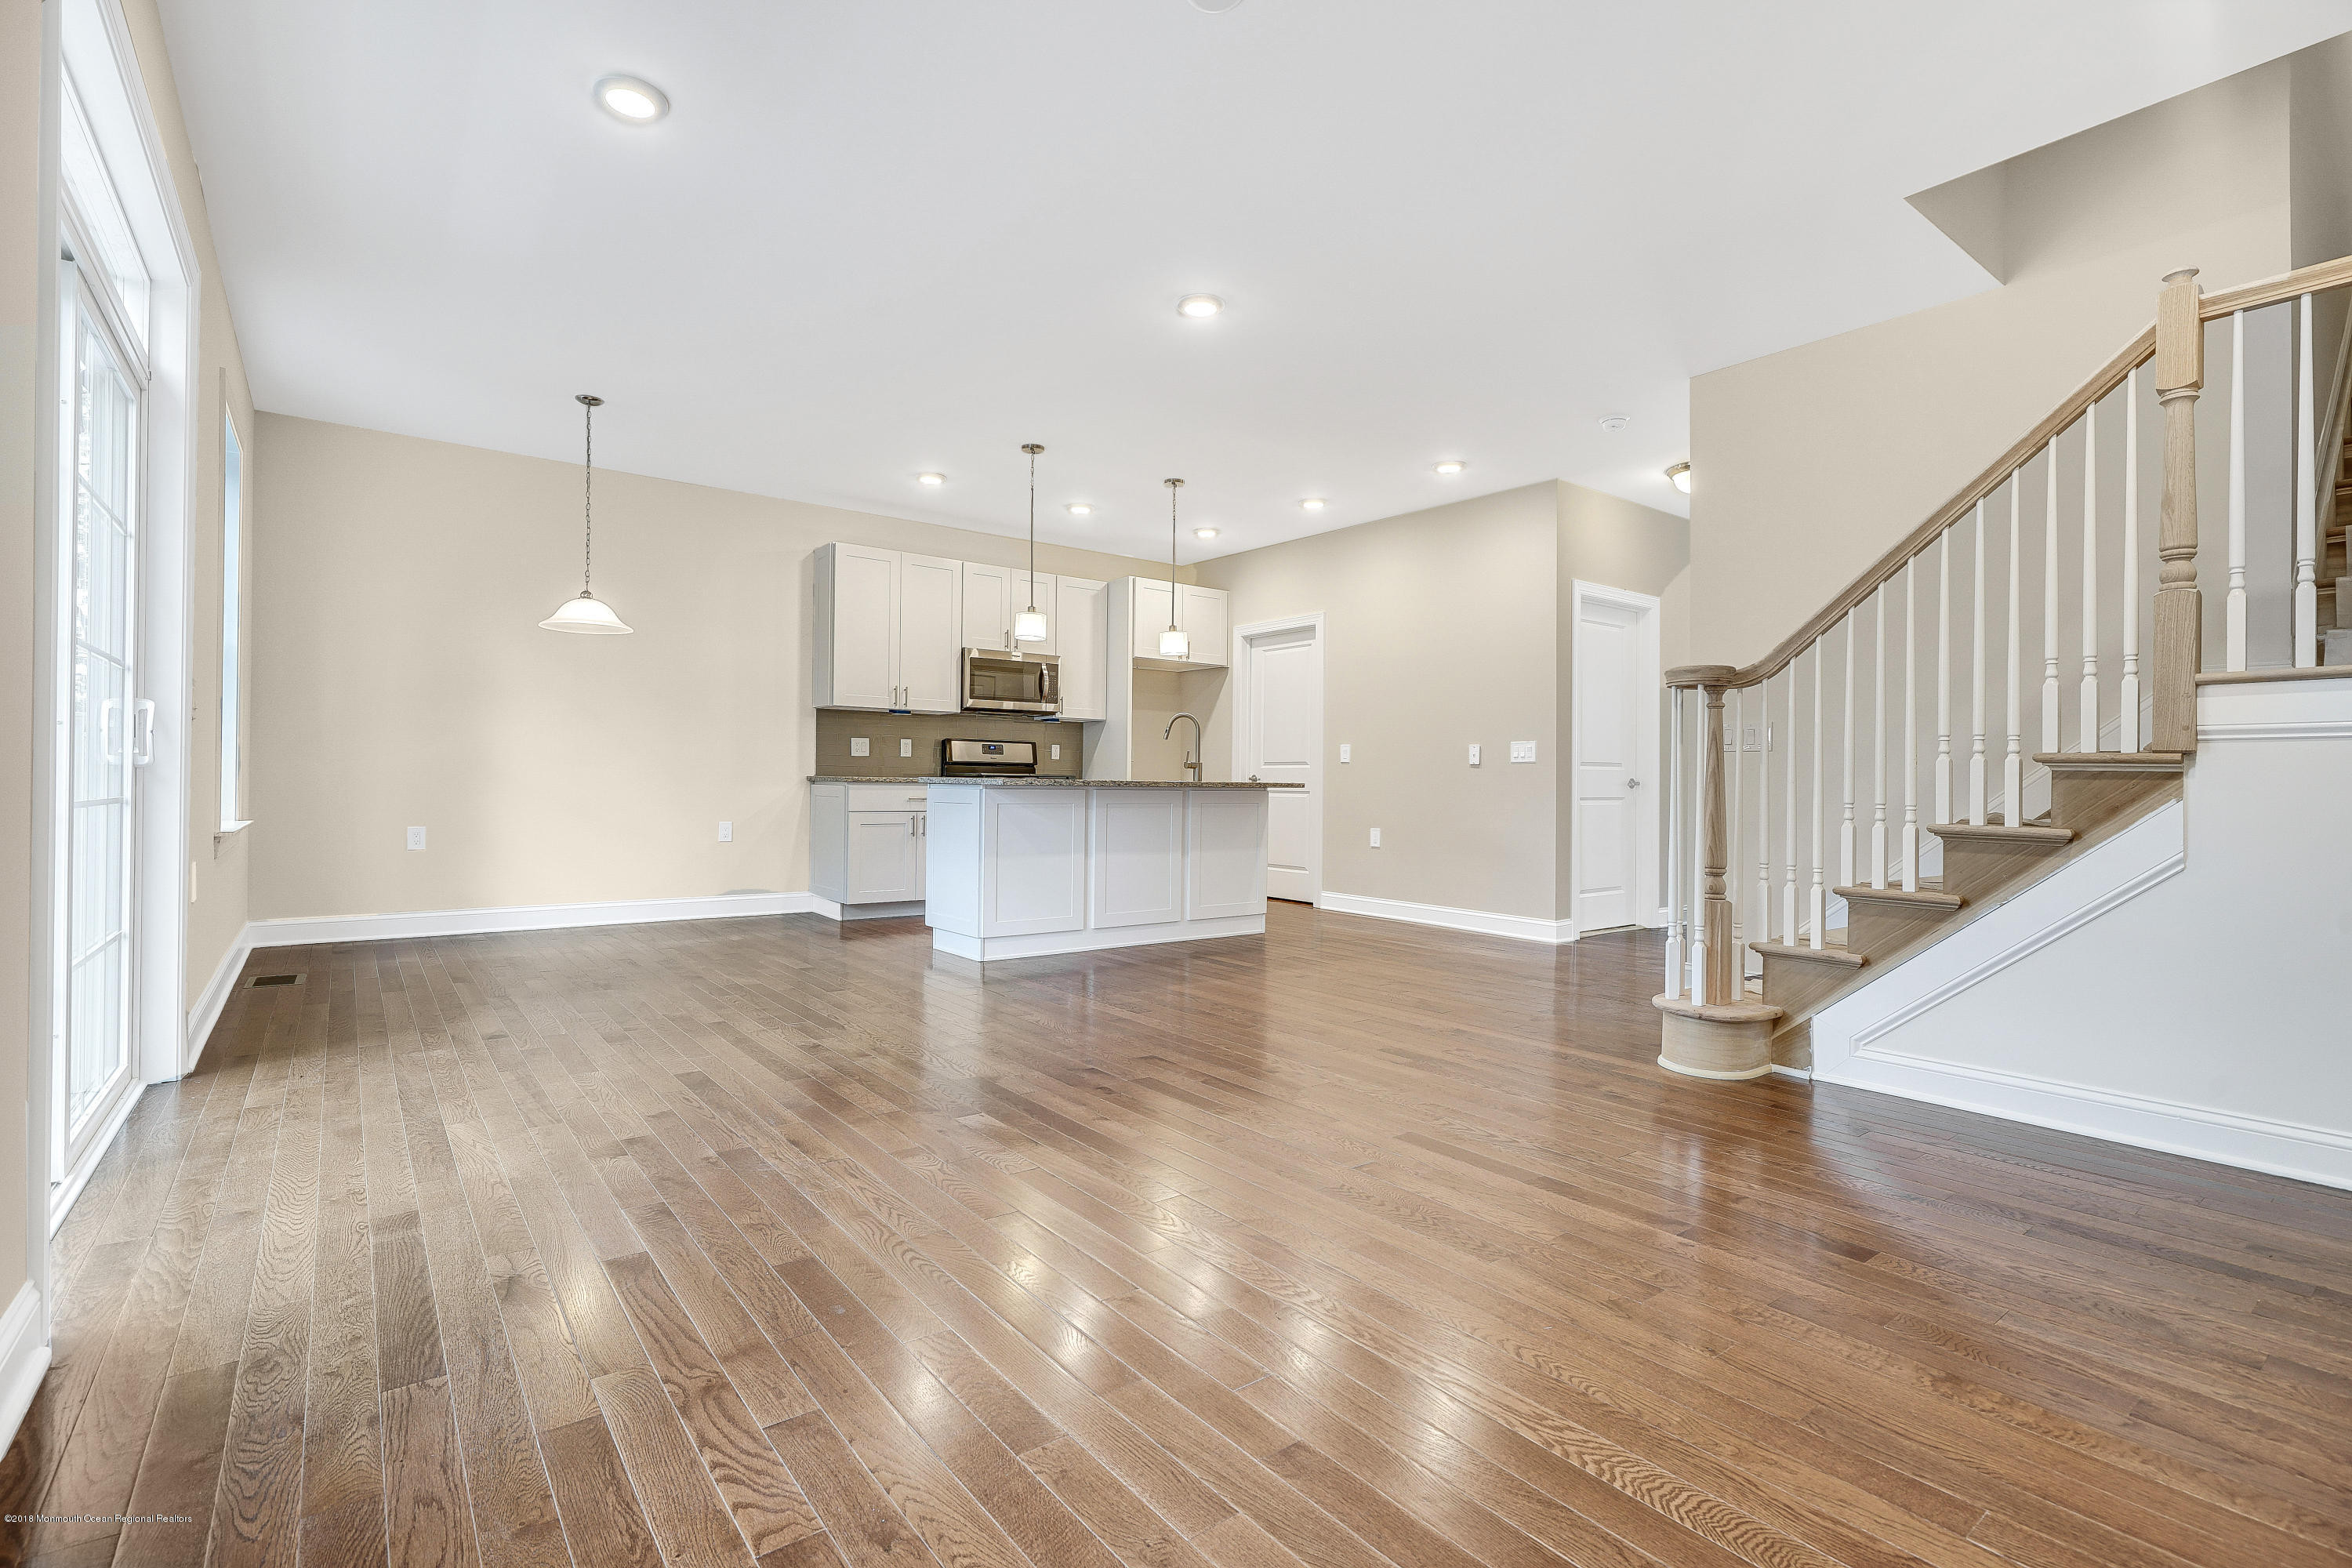 16 Popular Hardwood Flooring Stores Burlington Ontario 2024 free download hardwood flooring stores burlington ontario of home for sale at 2410 greentree drive in manasquan nj for 469950 pertaining to 2446 paynters rd unit c print 025 8 inte